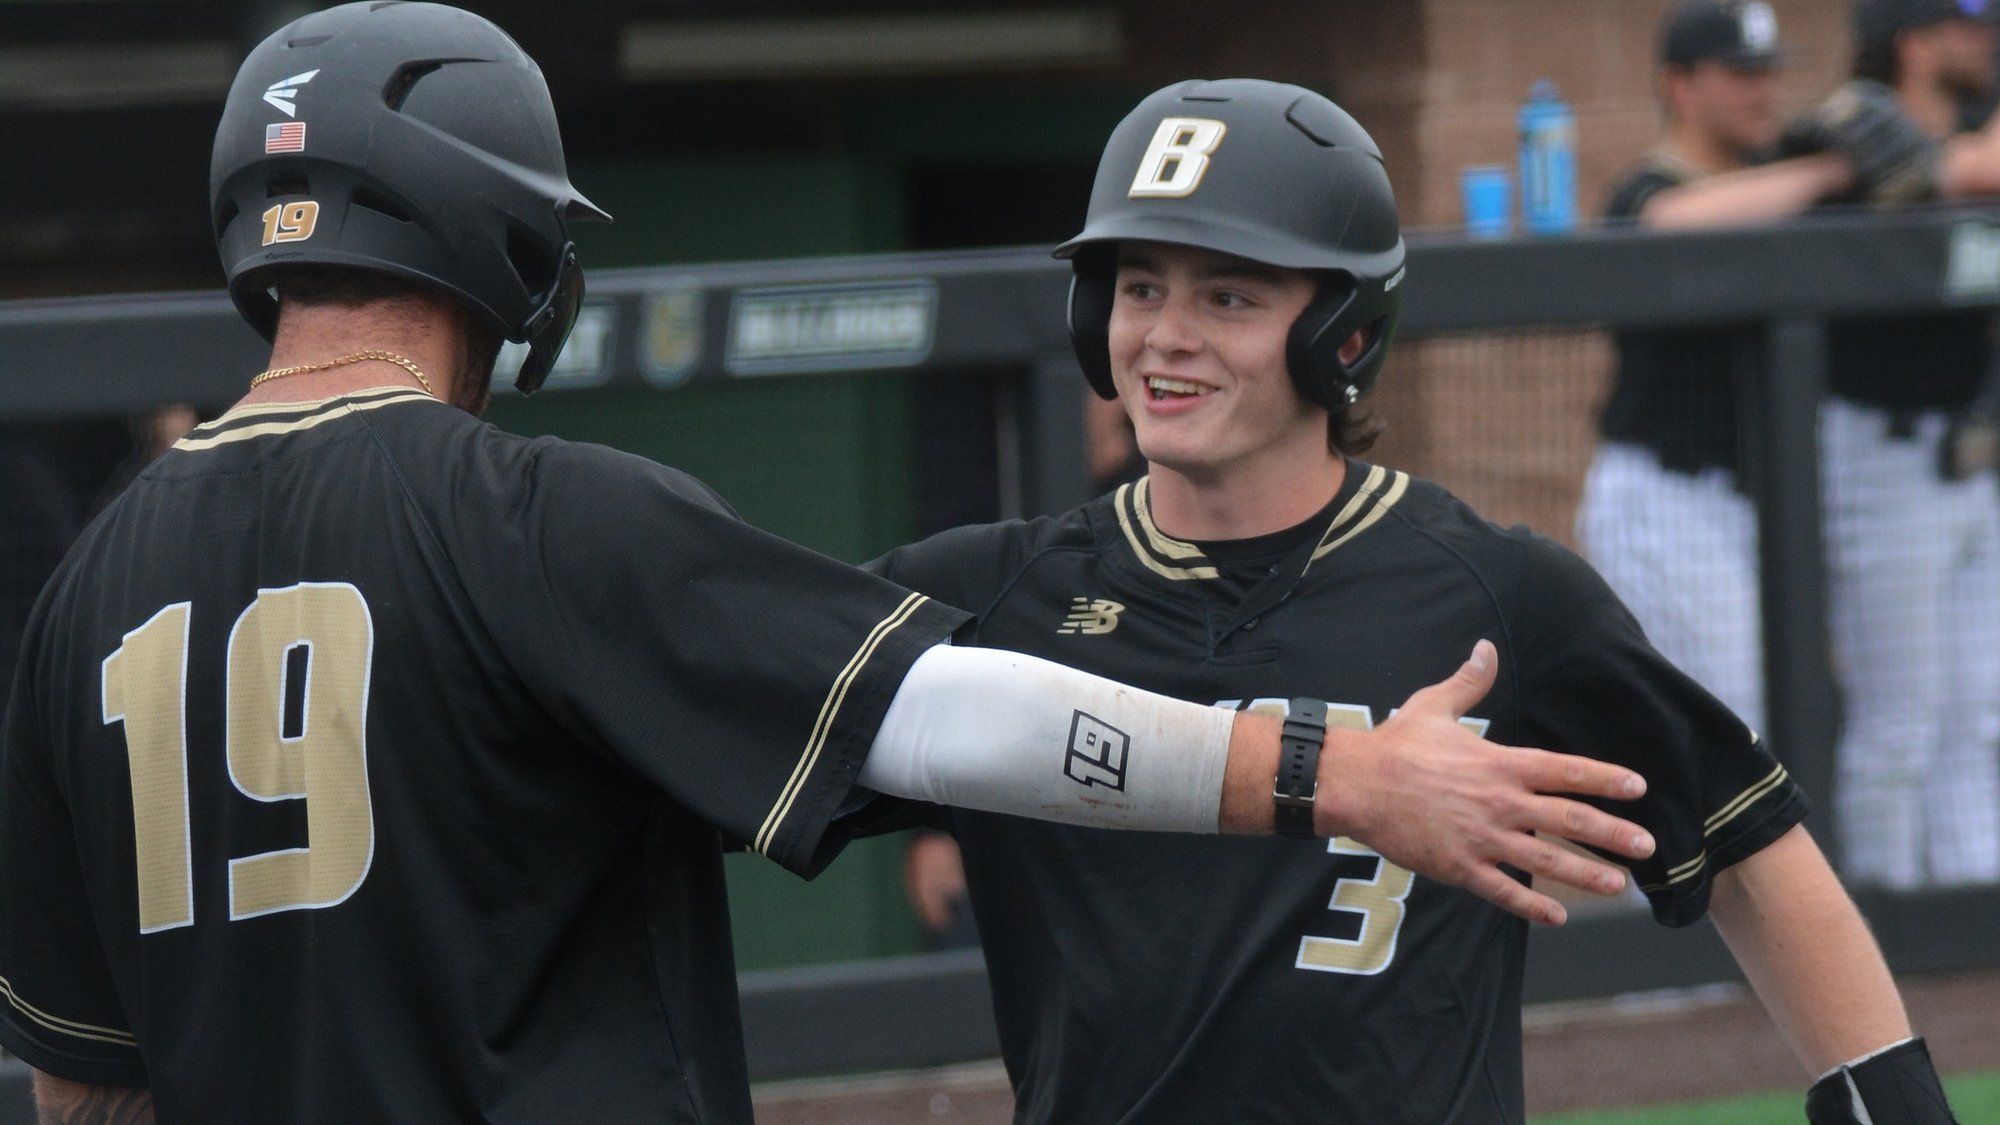 Bryant heads to New Jersey for America East series with NJIT